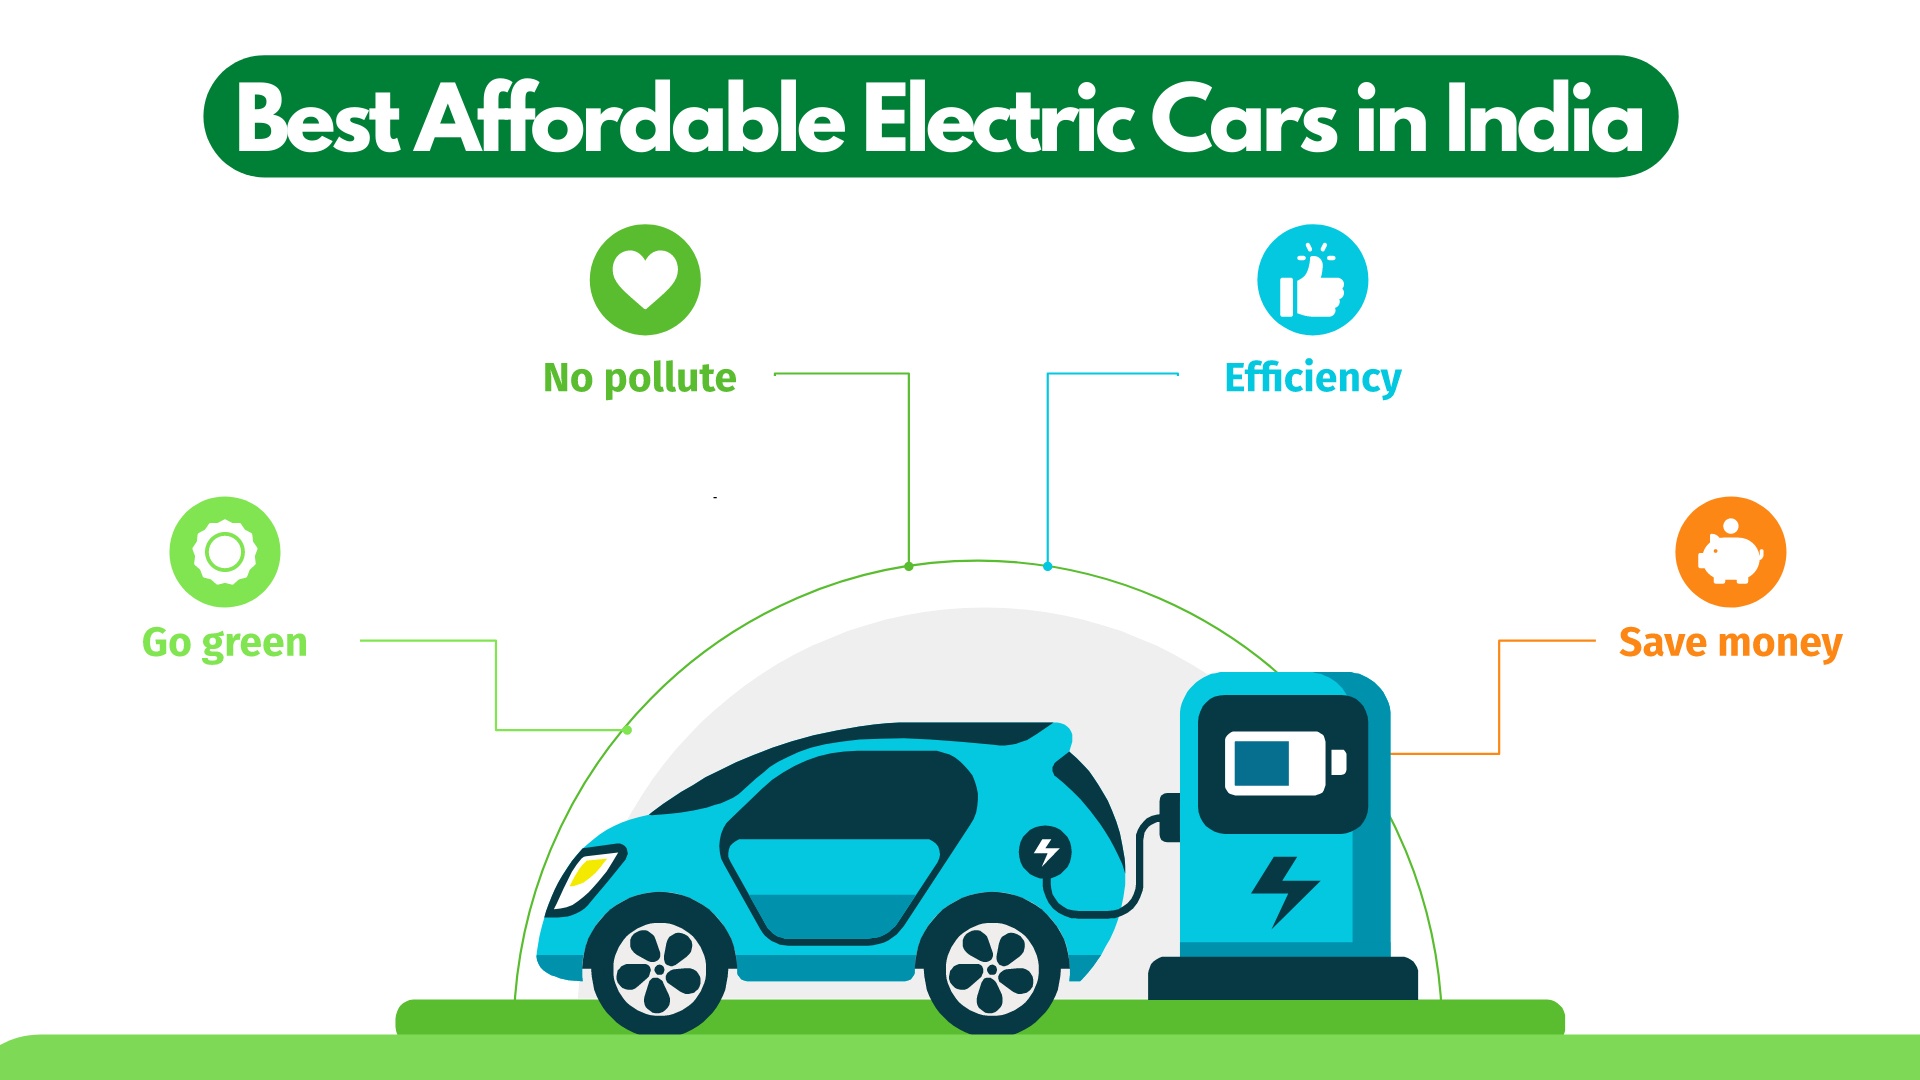 https://e-vehicleinfo.com/most-affordable-electric-cars-in-india/